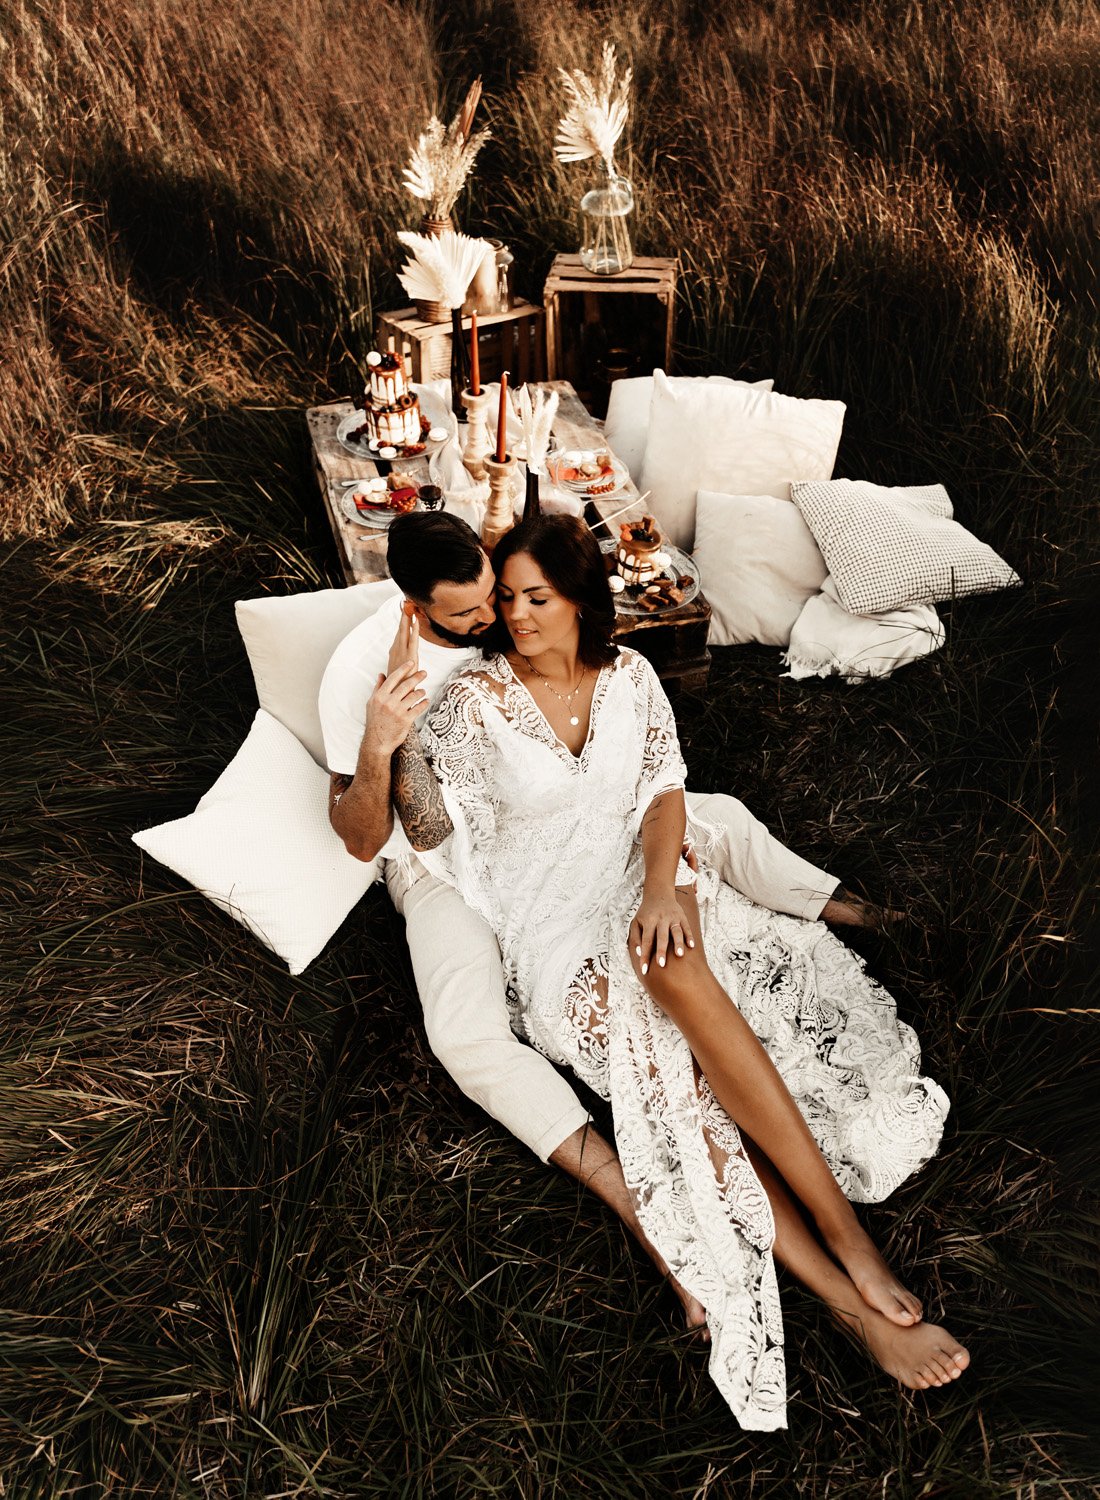 styled-picnic-engagement-photo-session-in-landstuhl-by couples-photographer-sarah-havens-kmc-germany (2).jpg